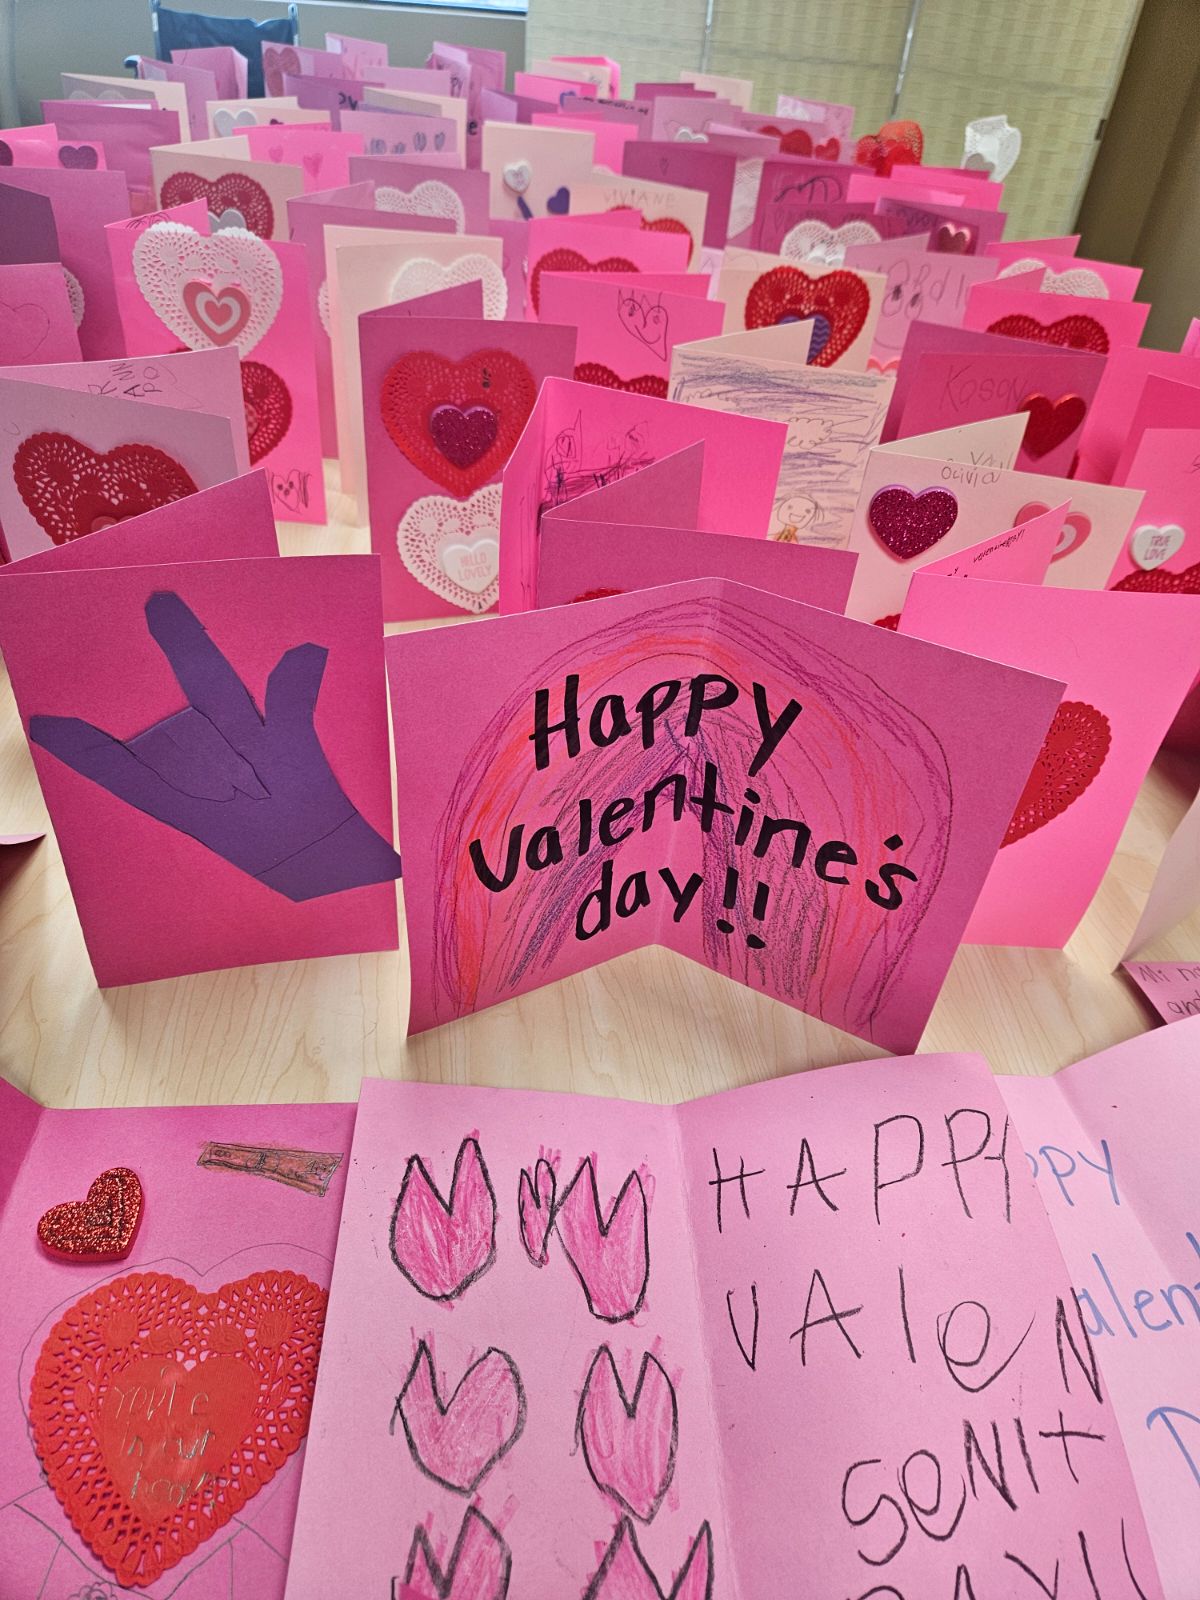 Thank you to all who shared your creativity and Valentines for our Dear Seniors!